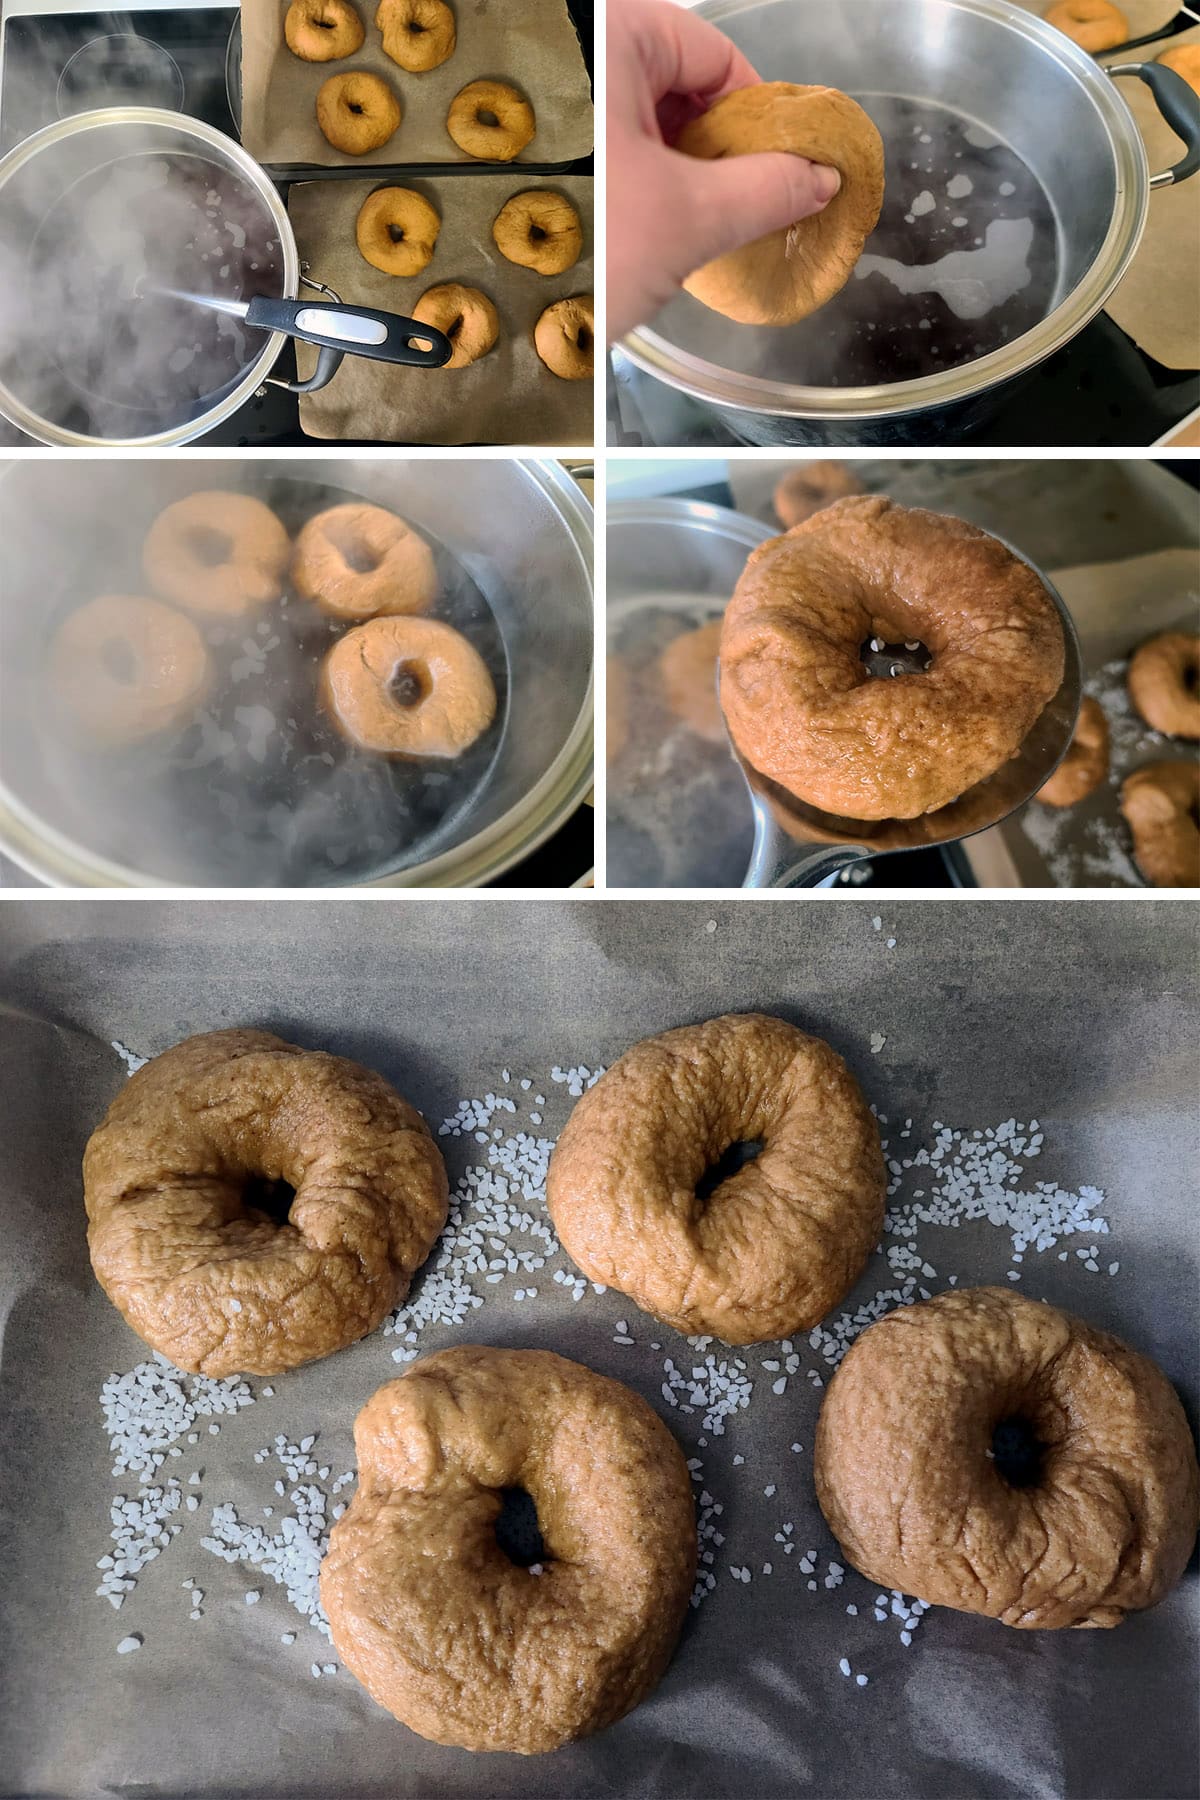 A 5 part image showing the bagels being boiled in molasses water, then set on a parchment lined baking sheet.